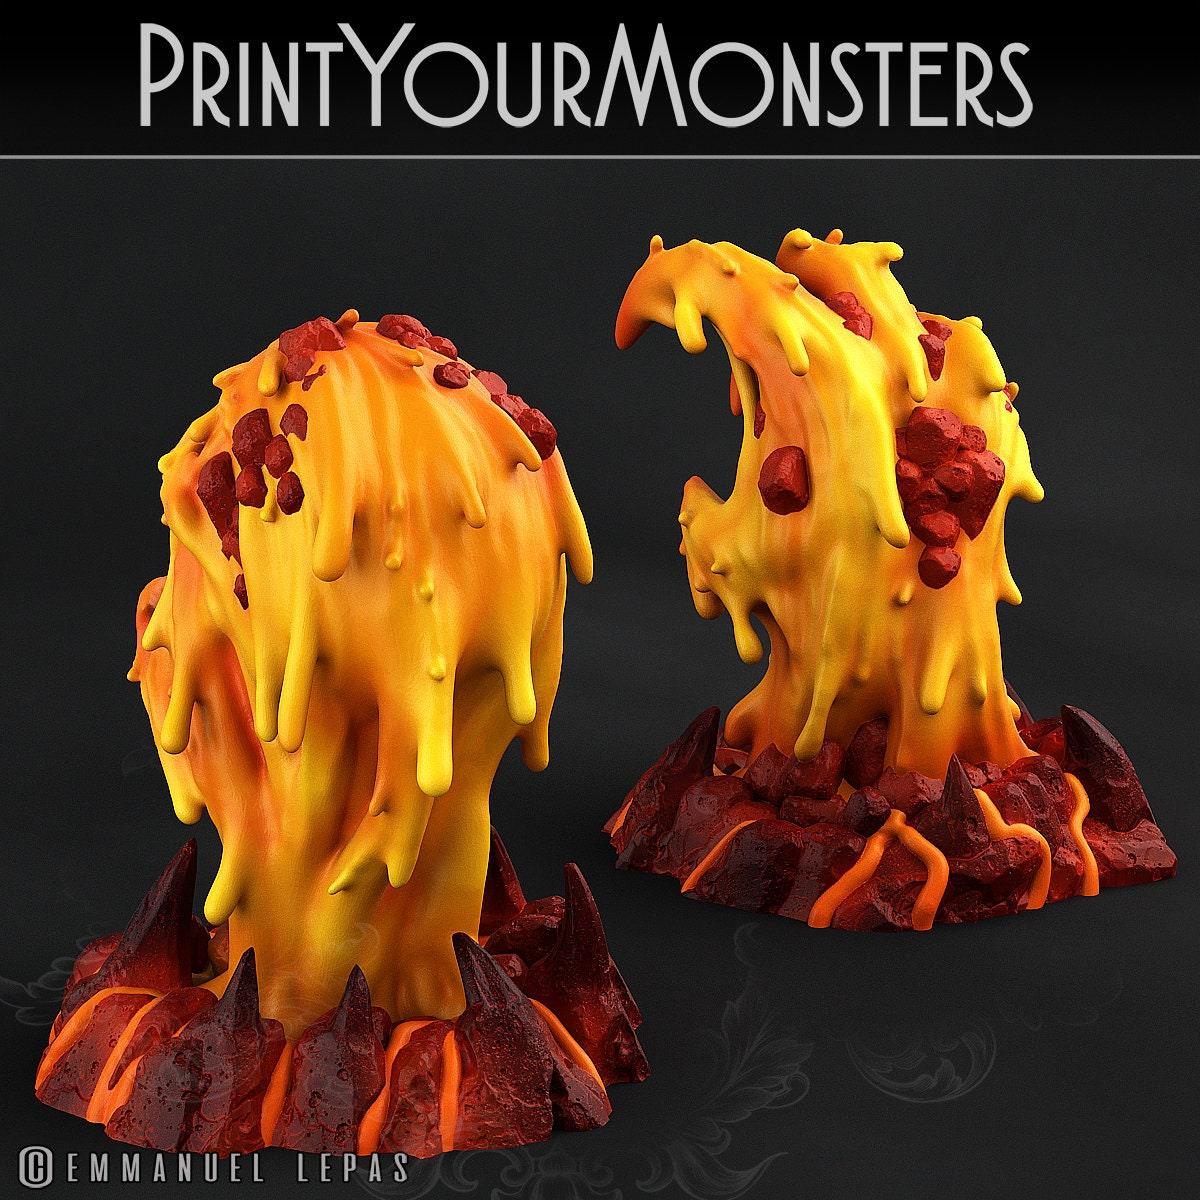 Infernal Magma Skull and Hand Miniatures Fire Miniature | Print Your Monsters | Tabletop gaming DnD Miniature | Dungeons and Dragons, DnD 5e - Plague Miniatures shop for DnD Miniatures